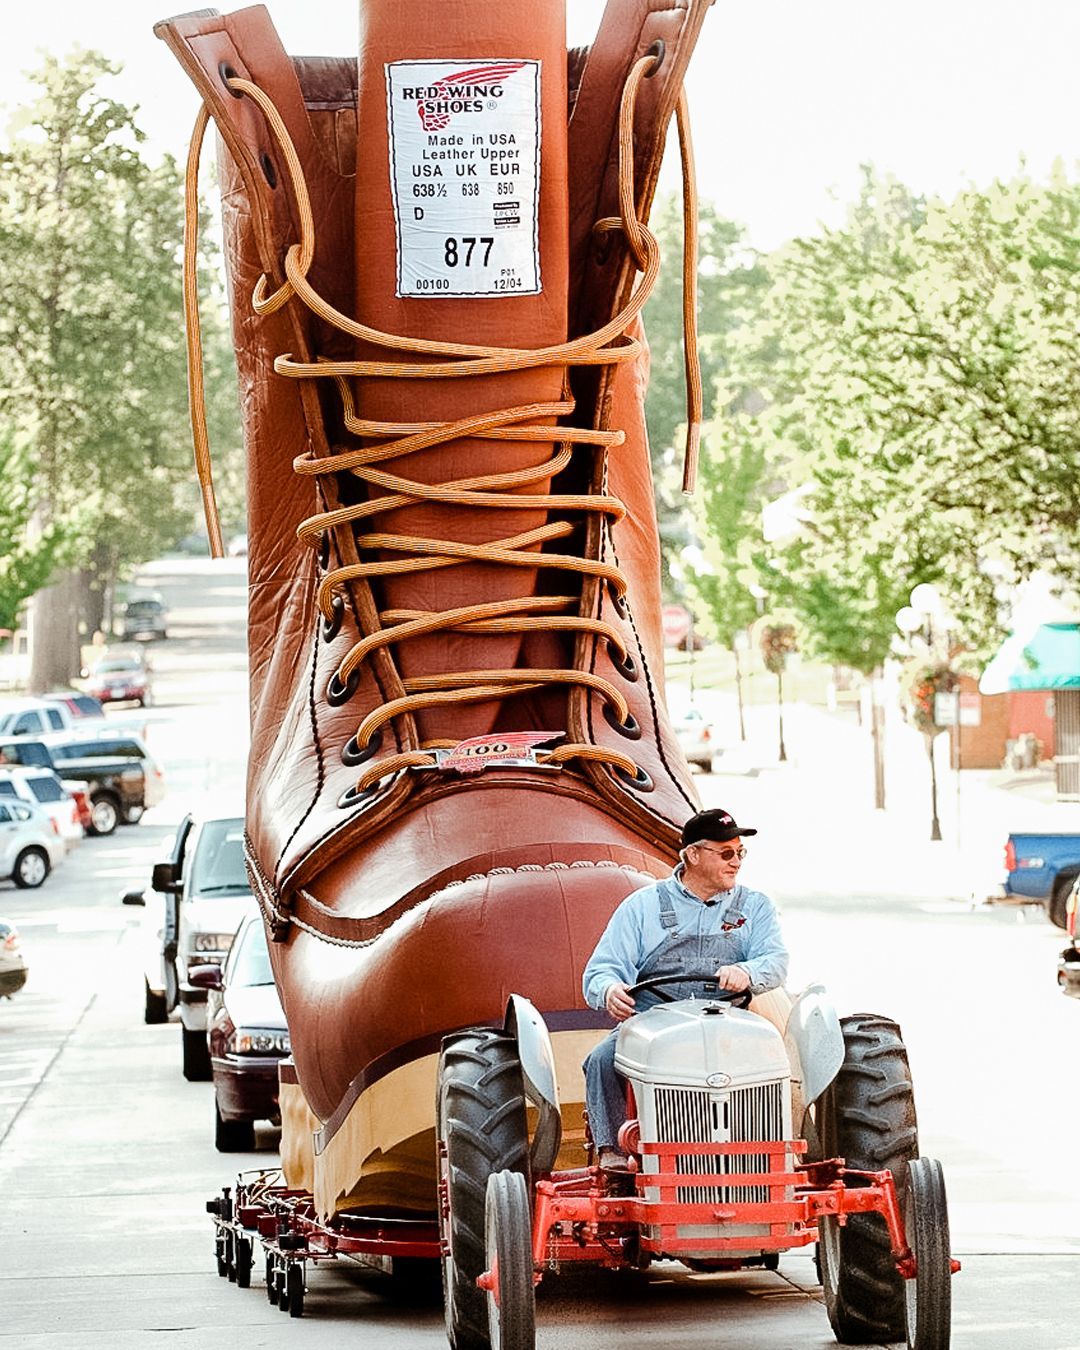 
World's Largest Boot, world record in Red Wing, Minnesota